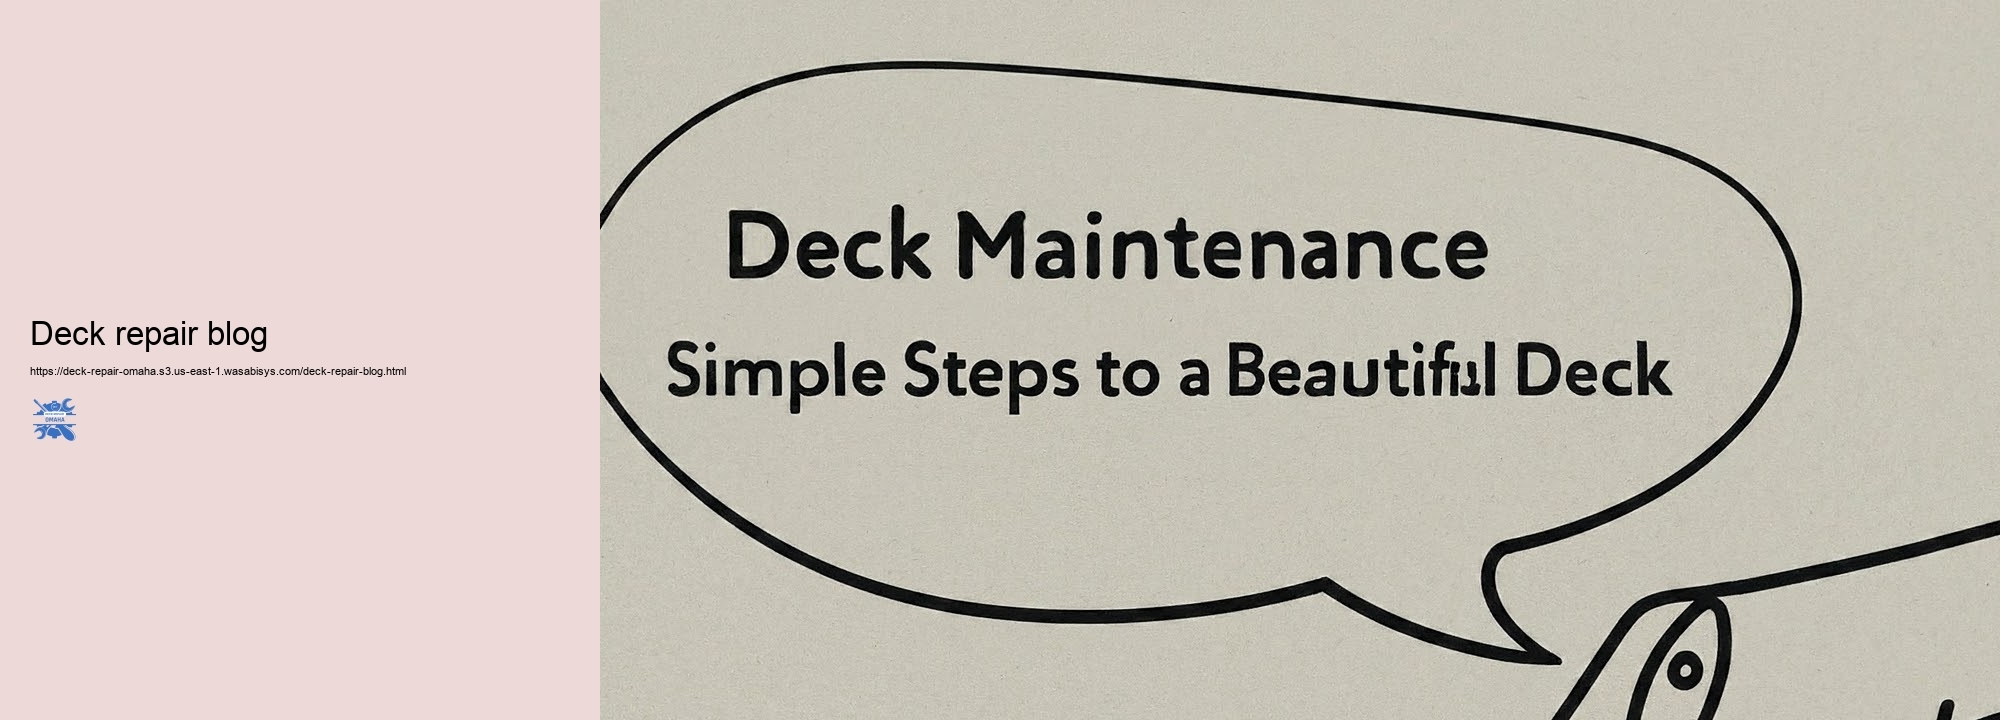 Simply exactly how to Maintain and Repair Your Deck in Omaha